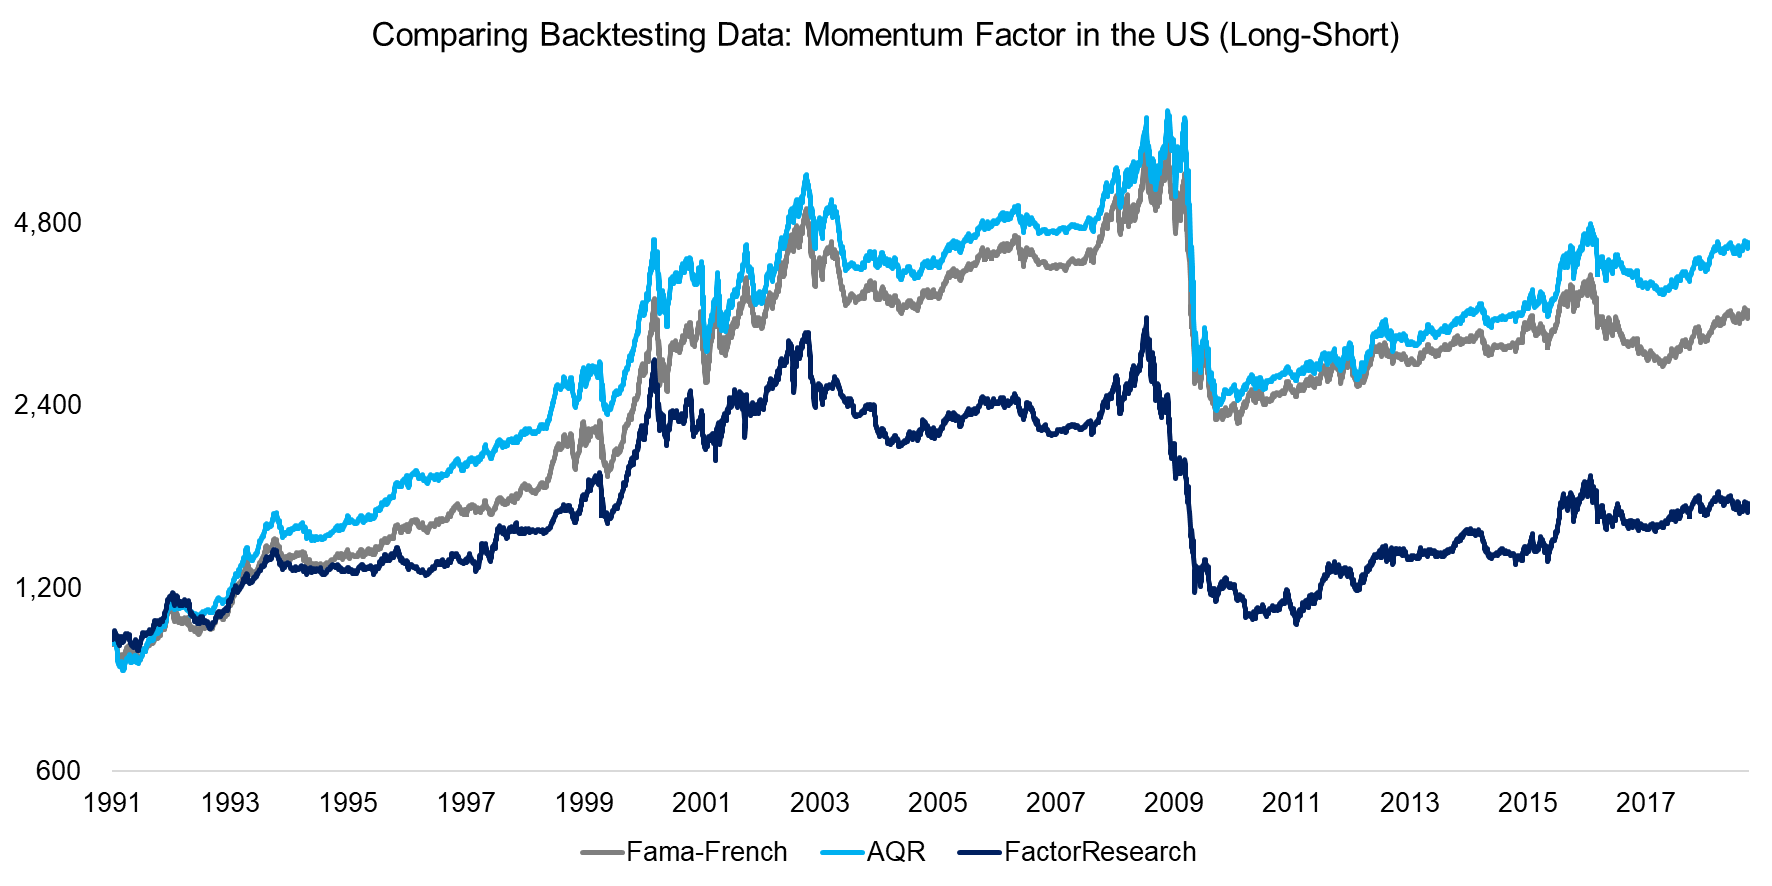 Comparing Backtesting Data Momentum Factor in the US (Long-Short)